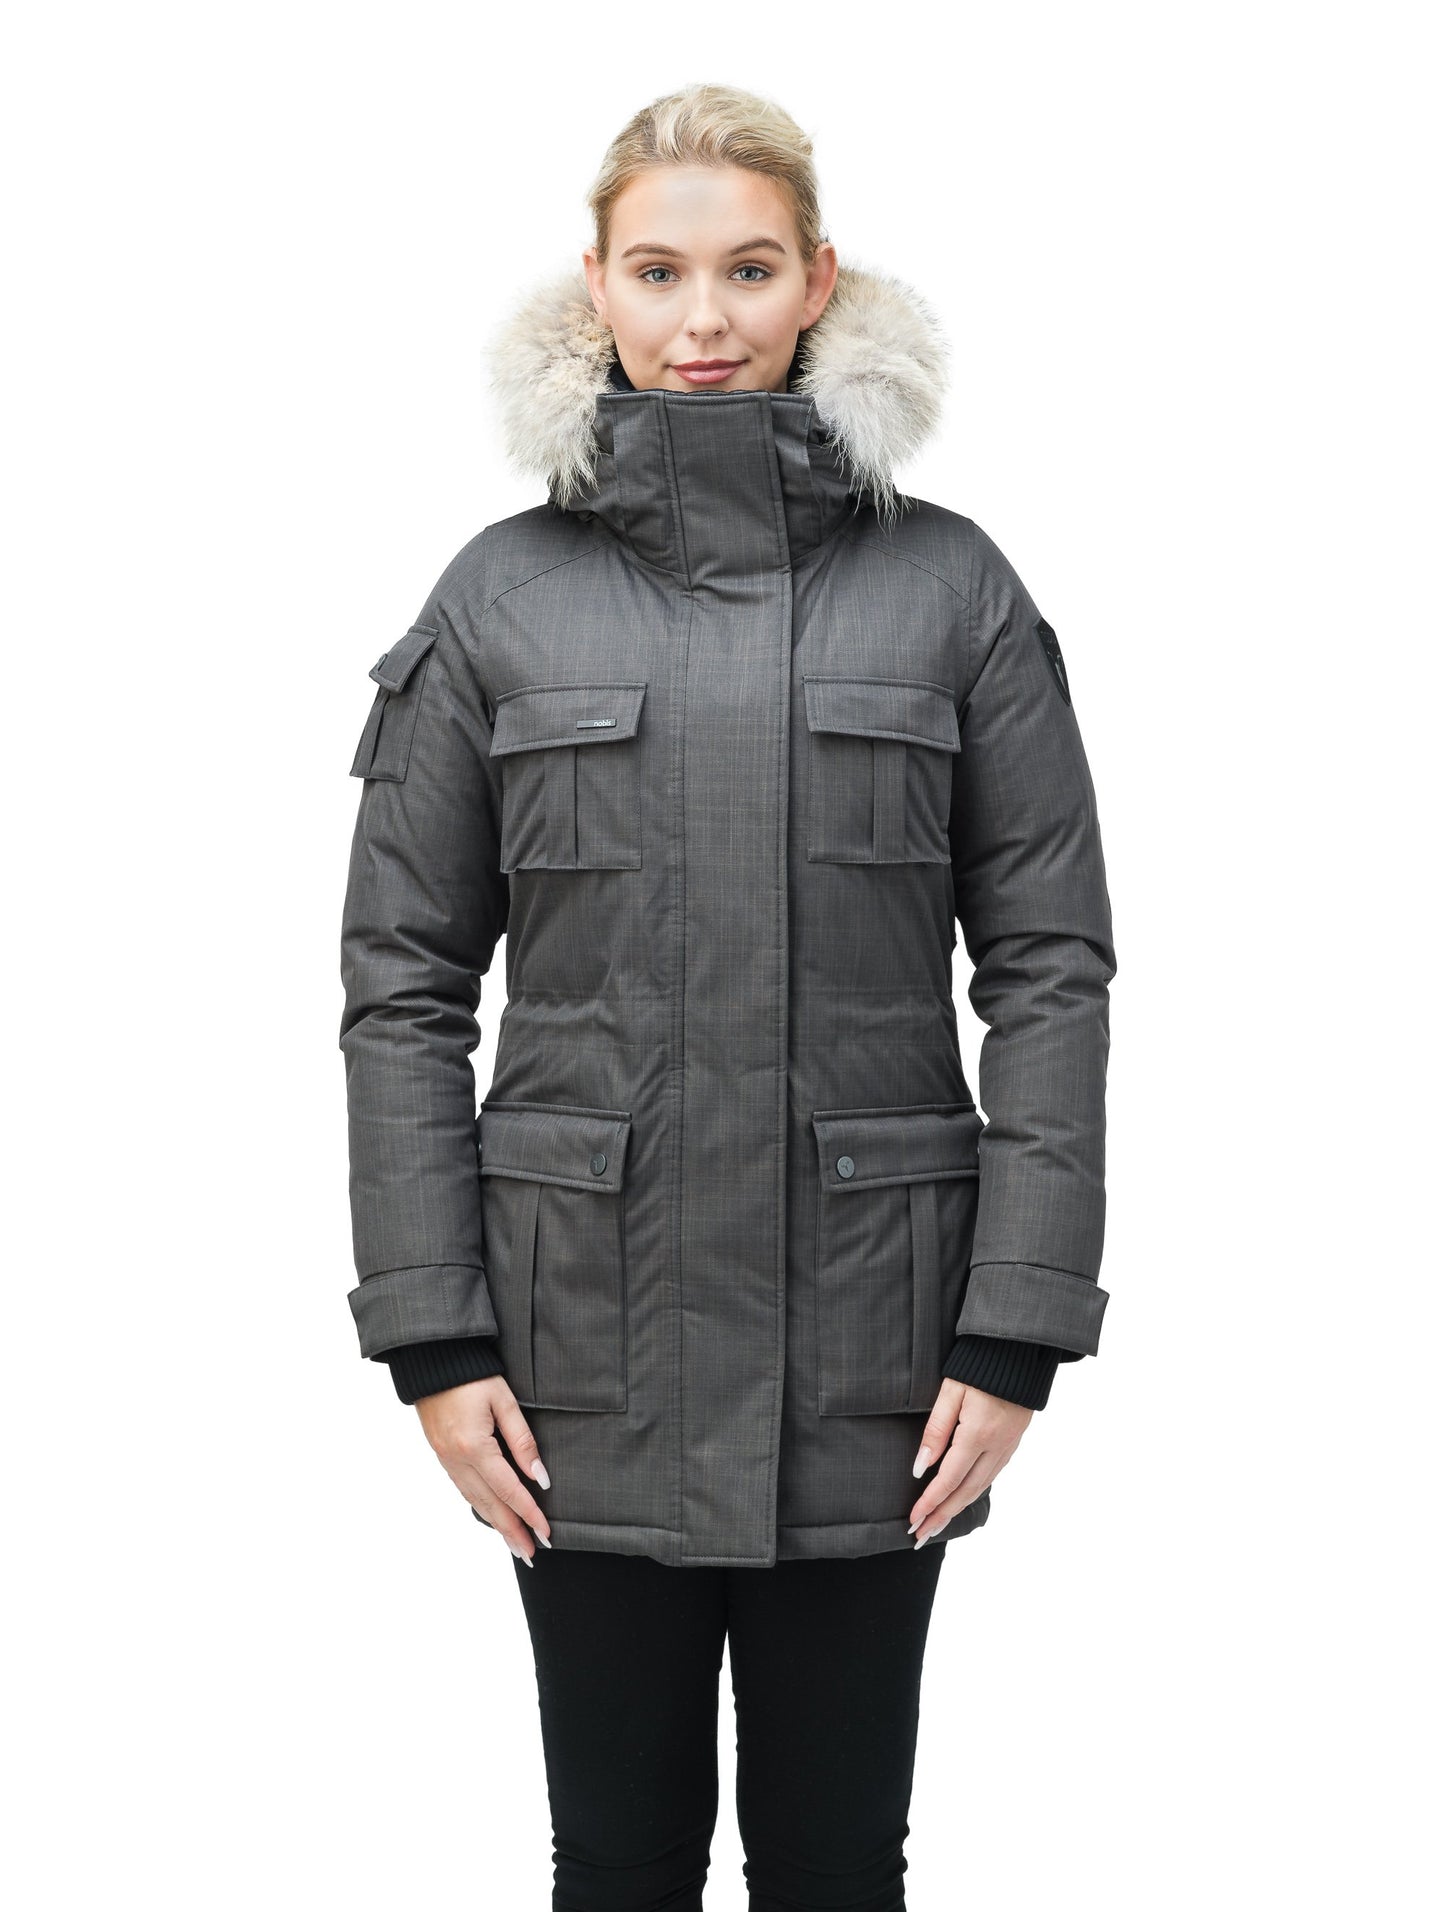 Women's down filled thigh length parka with four pleated patch pockets and an adjustable waist in CH Steel Grey